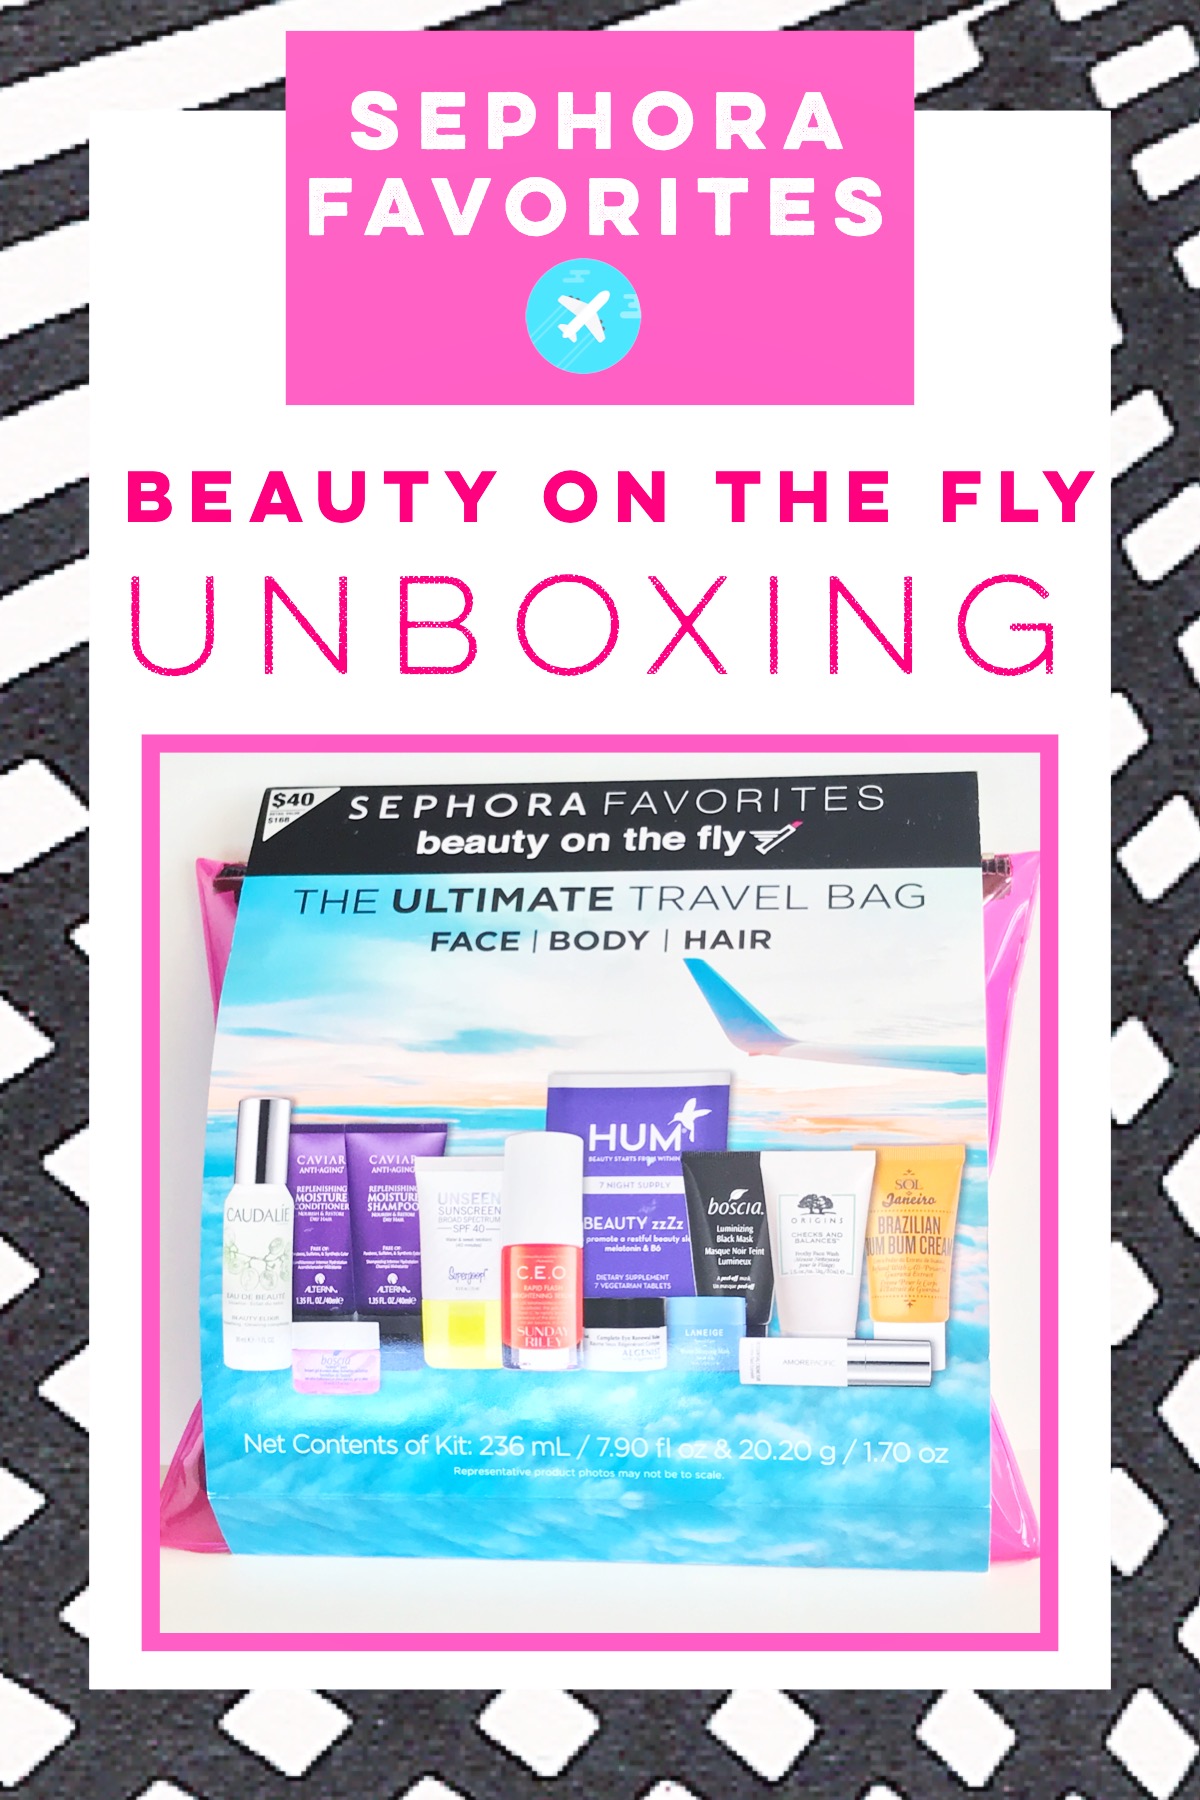 Sephora Favorites On the Fly – Unboxing